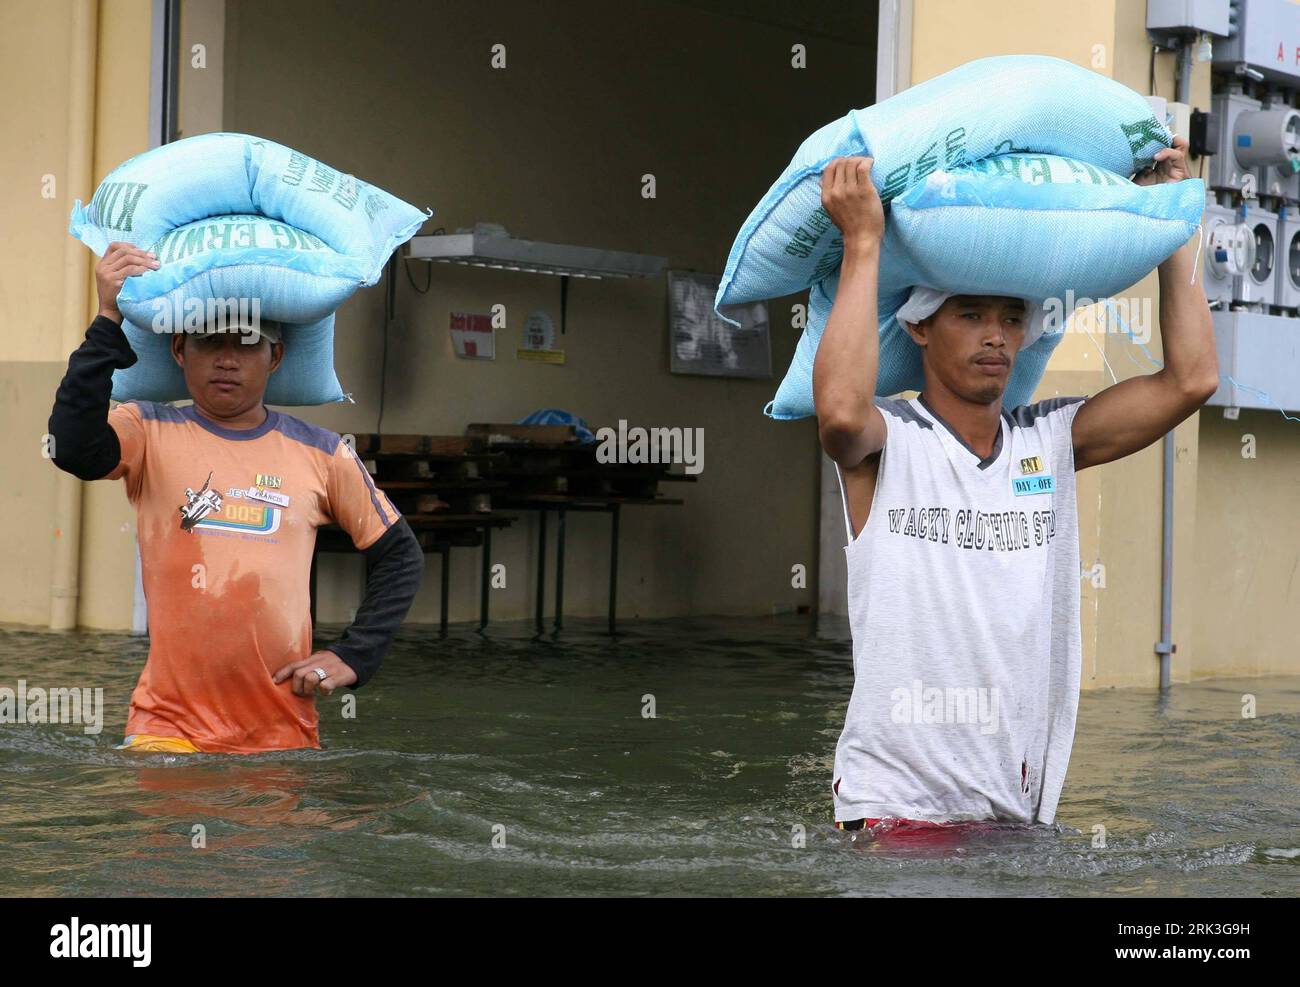 Bildnummer: 53506499  Datum: 05.10.2009  Copyright: imago/Xinhua (091005) -- MANILA, Oct. 5, 2009 (Xinhua) -- Filipinos walk in waist-deep floodwaters in Santa Cruz town, south of Manila, capital of the Philippines, on Oct. 5, 2009. At least 16were killed, mostly buried in landslides, as Typhoon Parma swept through the Philippines northern coast since Oct. 3, leaving trees uprooted, power pylons toppled and houses damaged. (Xinhua/Sybhel Cordero) (lr) (4)THE PHILIPPINES-TYPHOON PARMA-AFTERMATH PUBLICATIONxNOTxINxCHN Philippinen Taifun Parma Naturtatastophen Flut Überschwemmung kbdig xub 2009 q Stock Photo